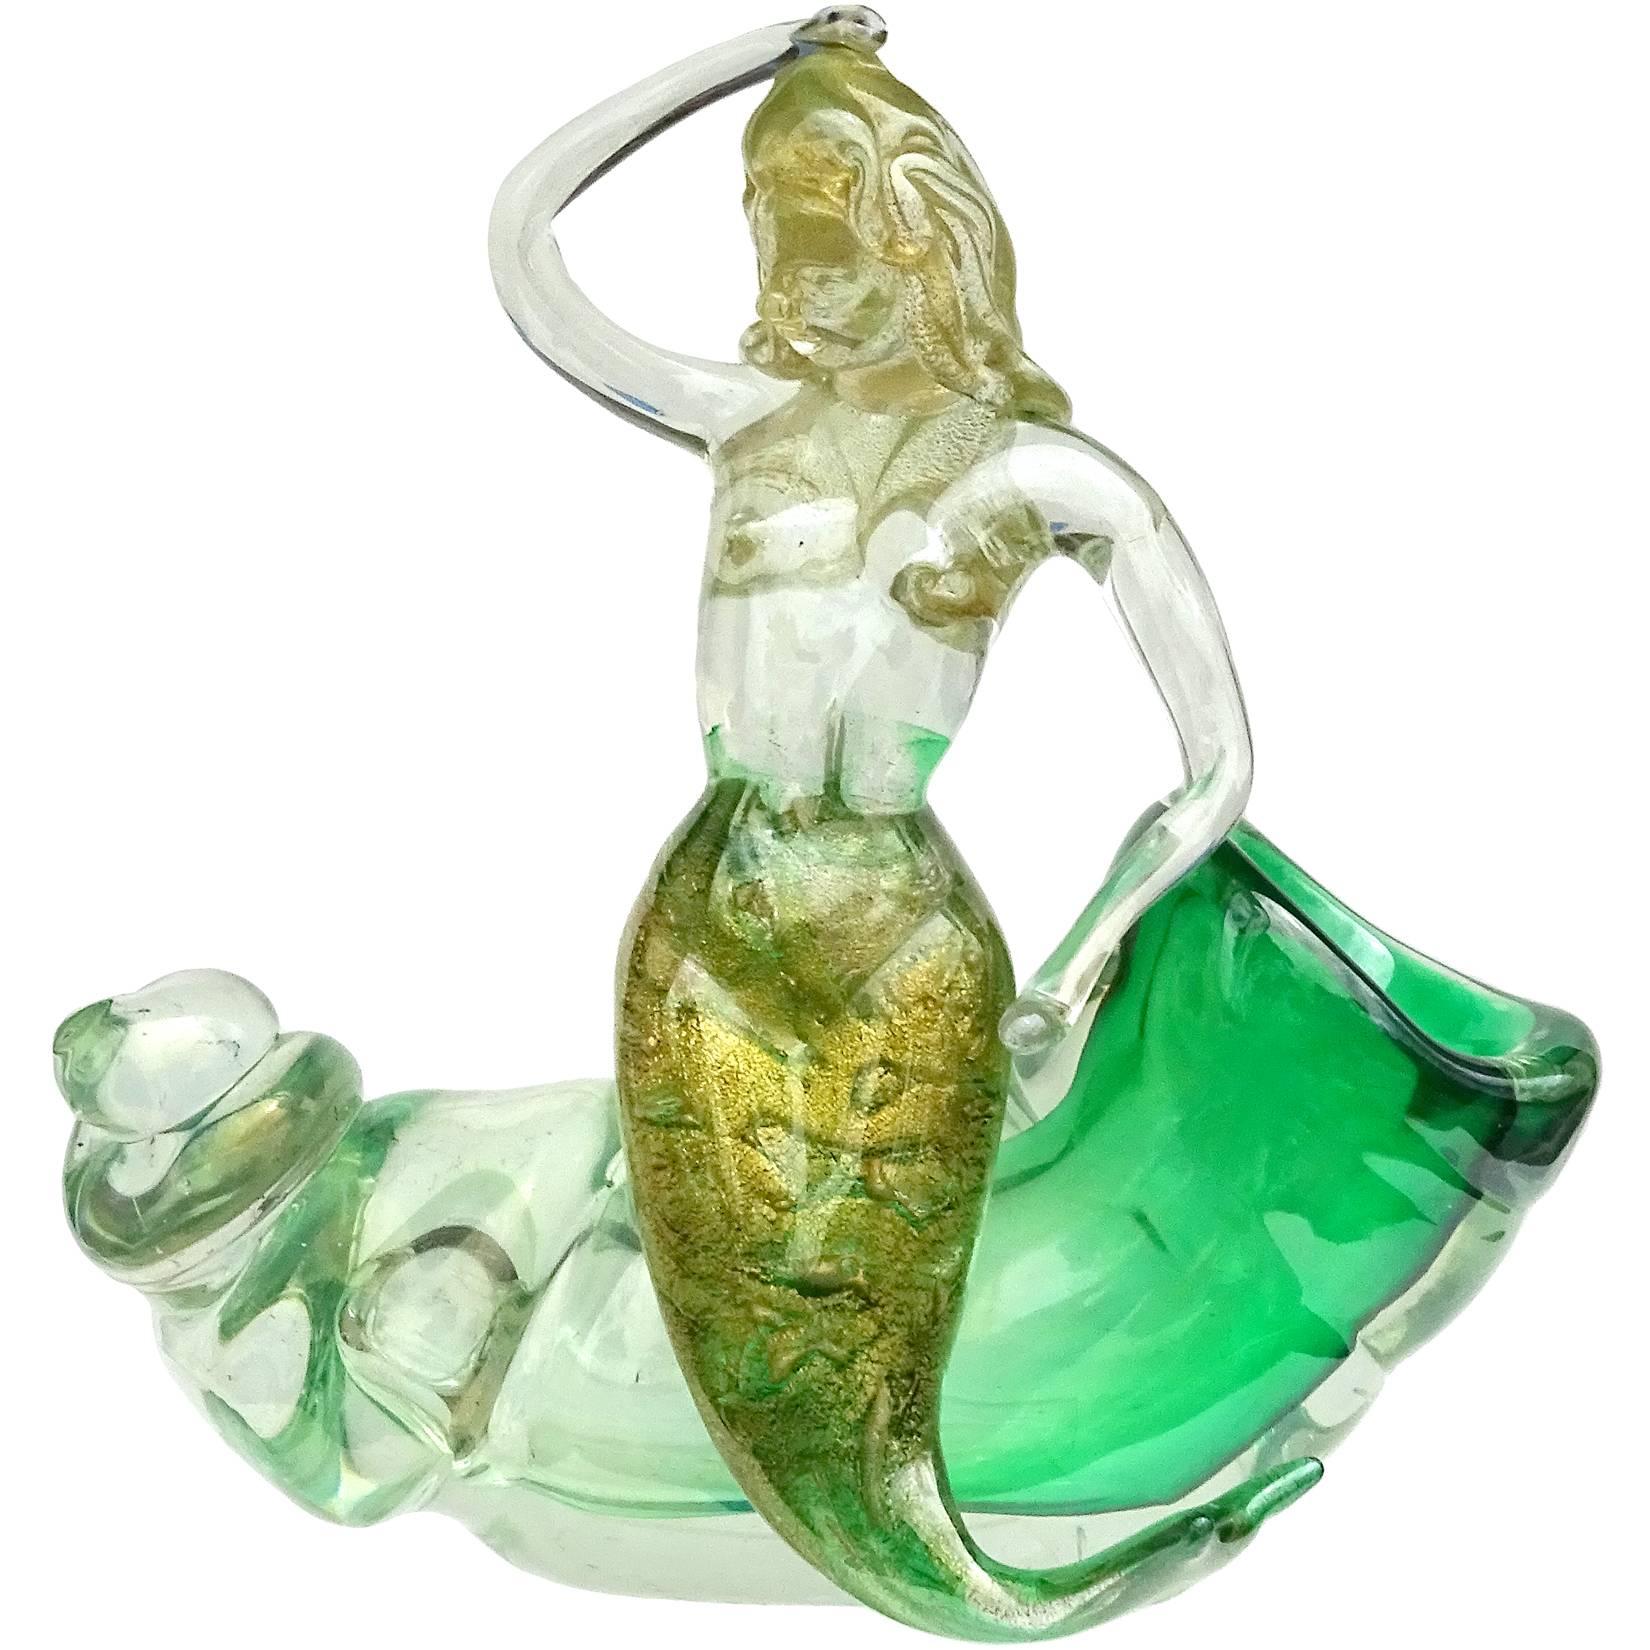 Free shipping worldwide! See details below description.

Rare, large and gorgeous Murano handblown, green with gold flecks and iridescent surface art glass mermaid figure on large seashell. Created in the manner of the Barovier e Toso and Seguso